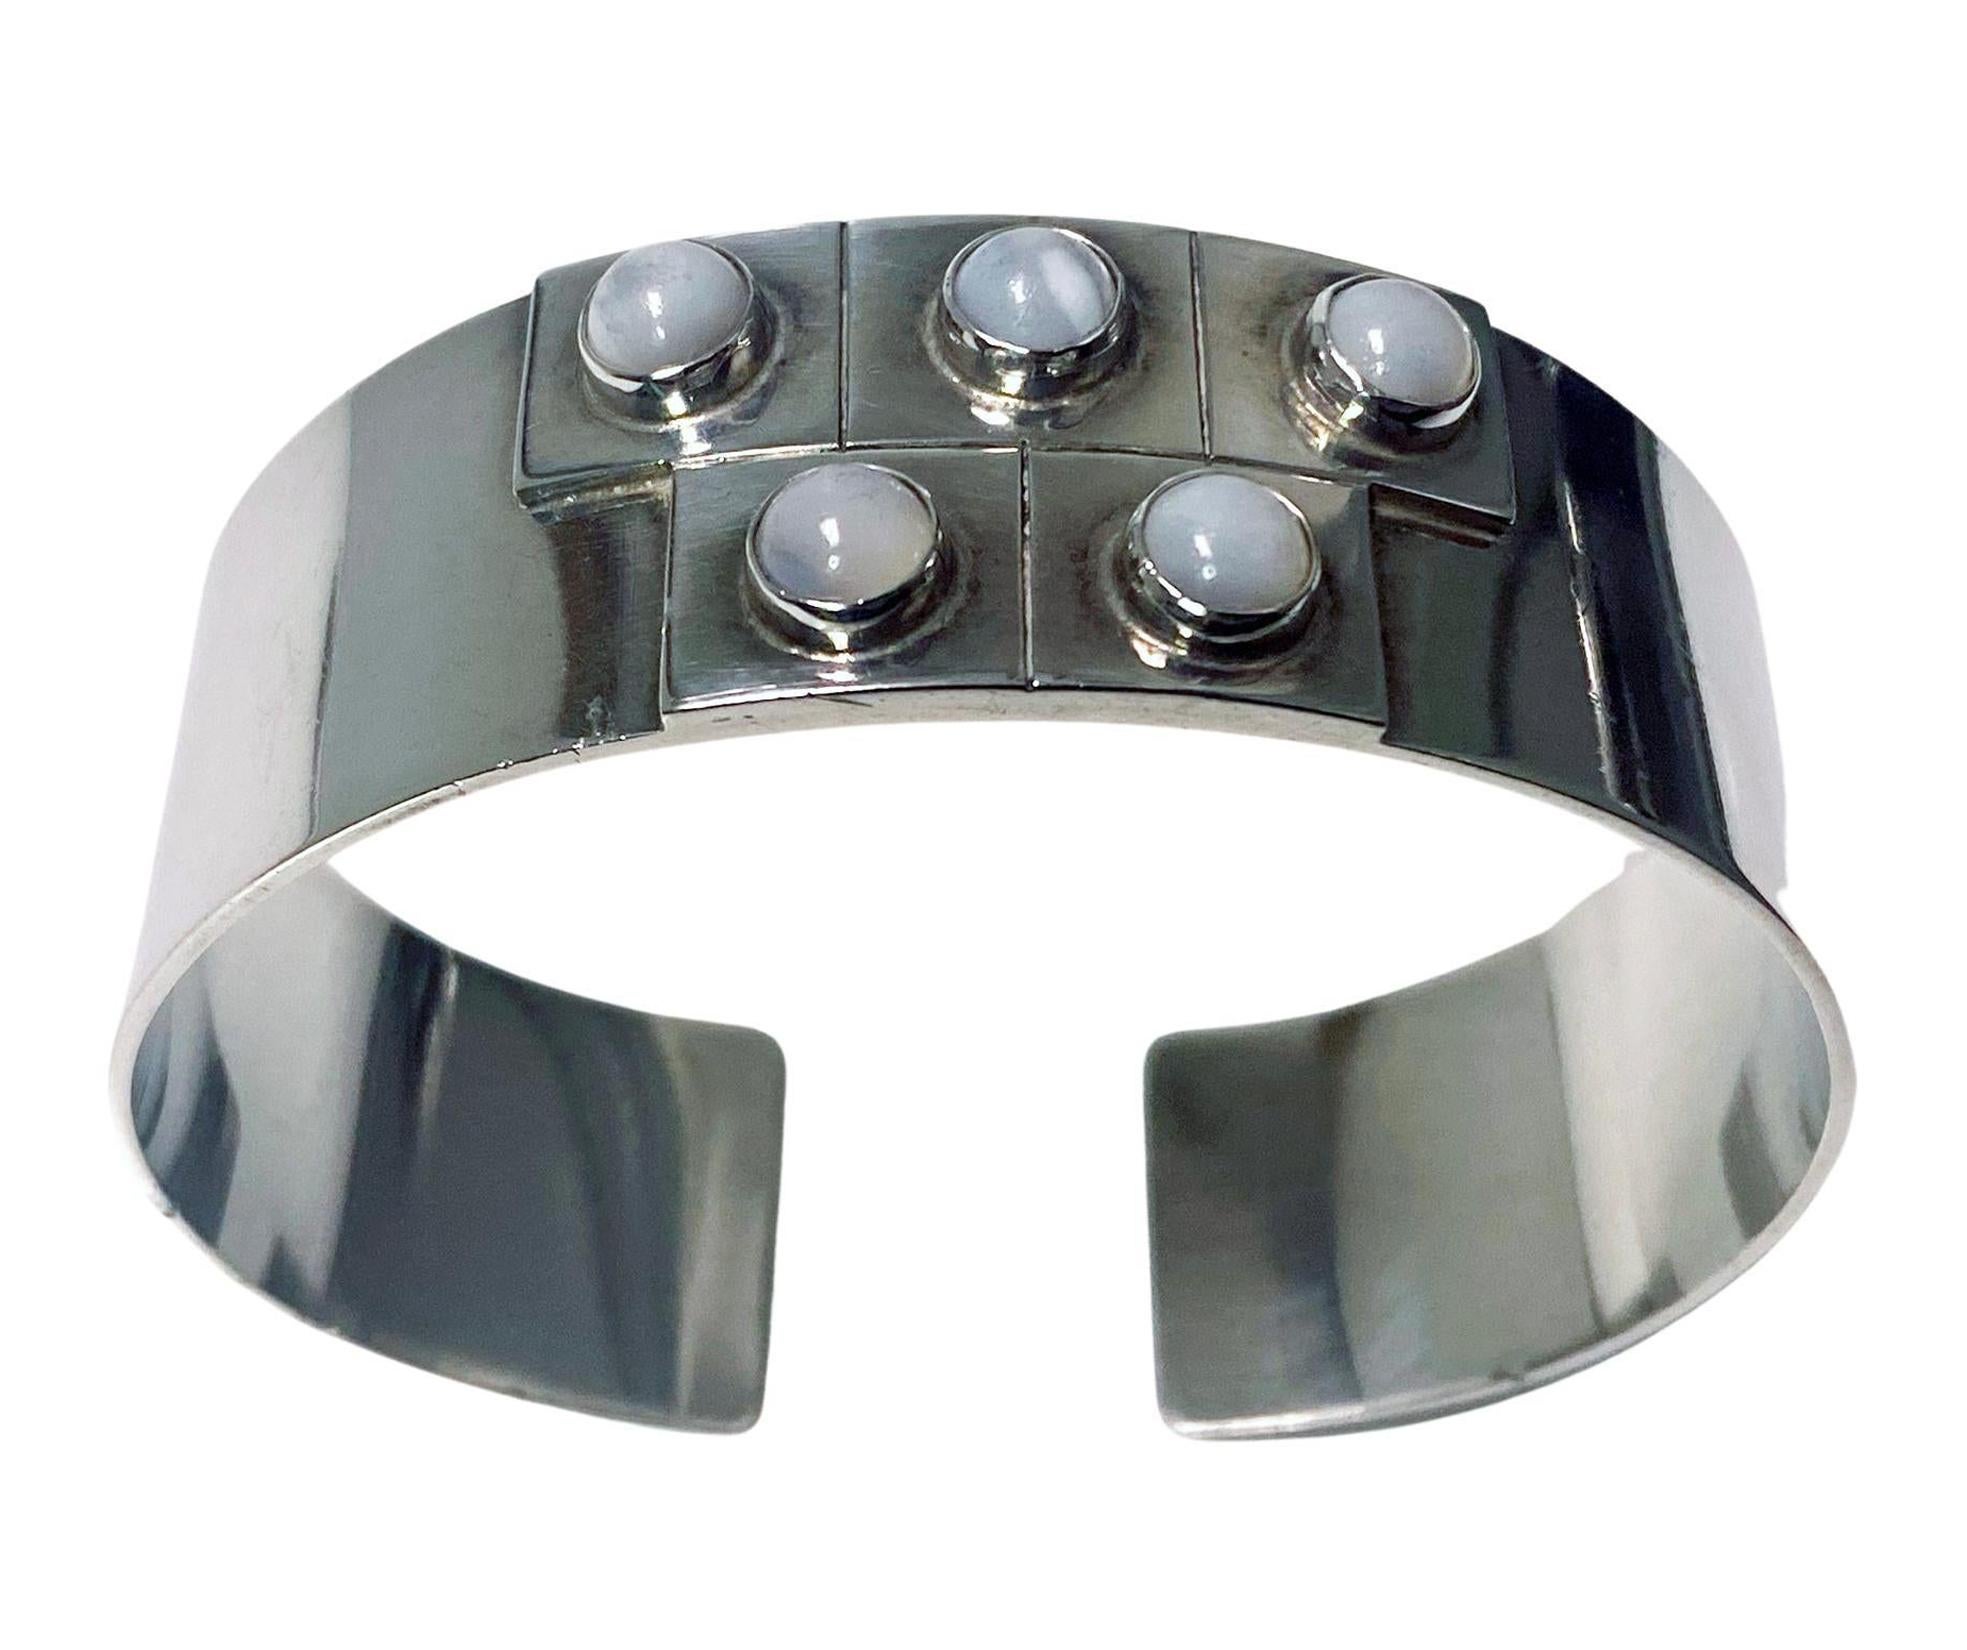 Joaquin Tinta Sterling Silver and white bead cuff bracelet bangle. Polished background with raised squares design each inset with bezel set pearl like bead. Stamped Ecuador Sterling Tinta. Width 7/8 inches. Weight: 47 grams. Will fit up to 7.5-inch